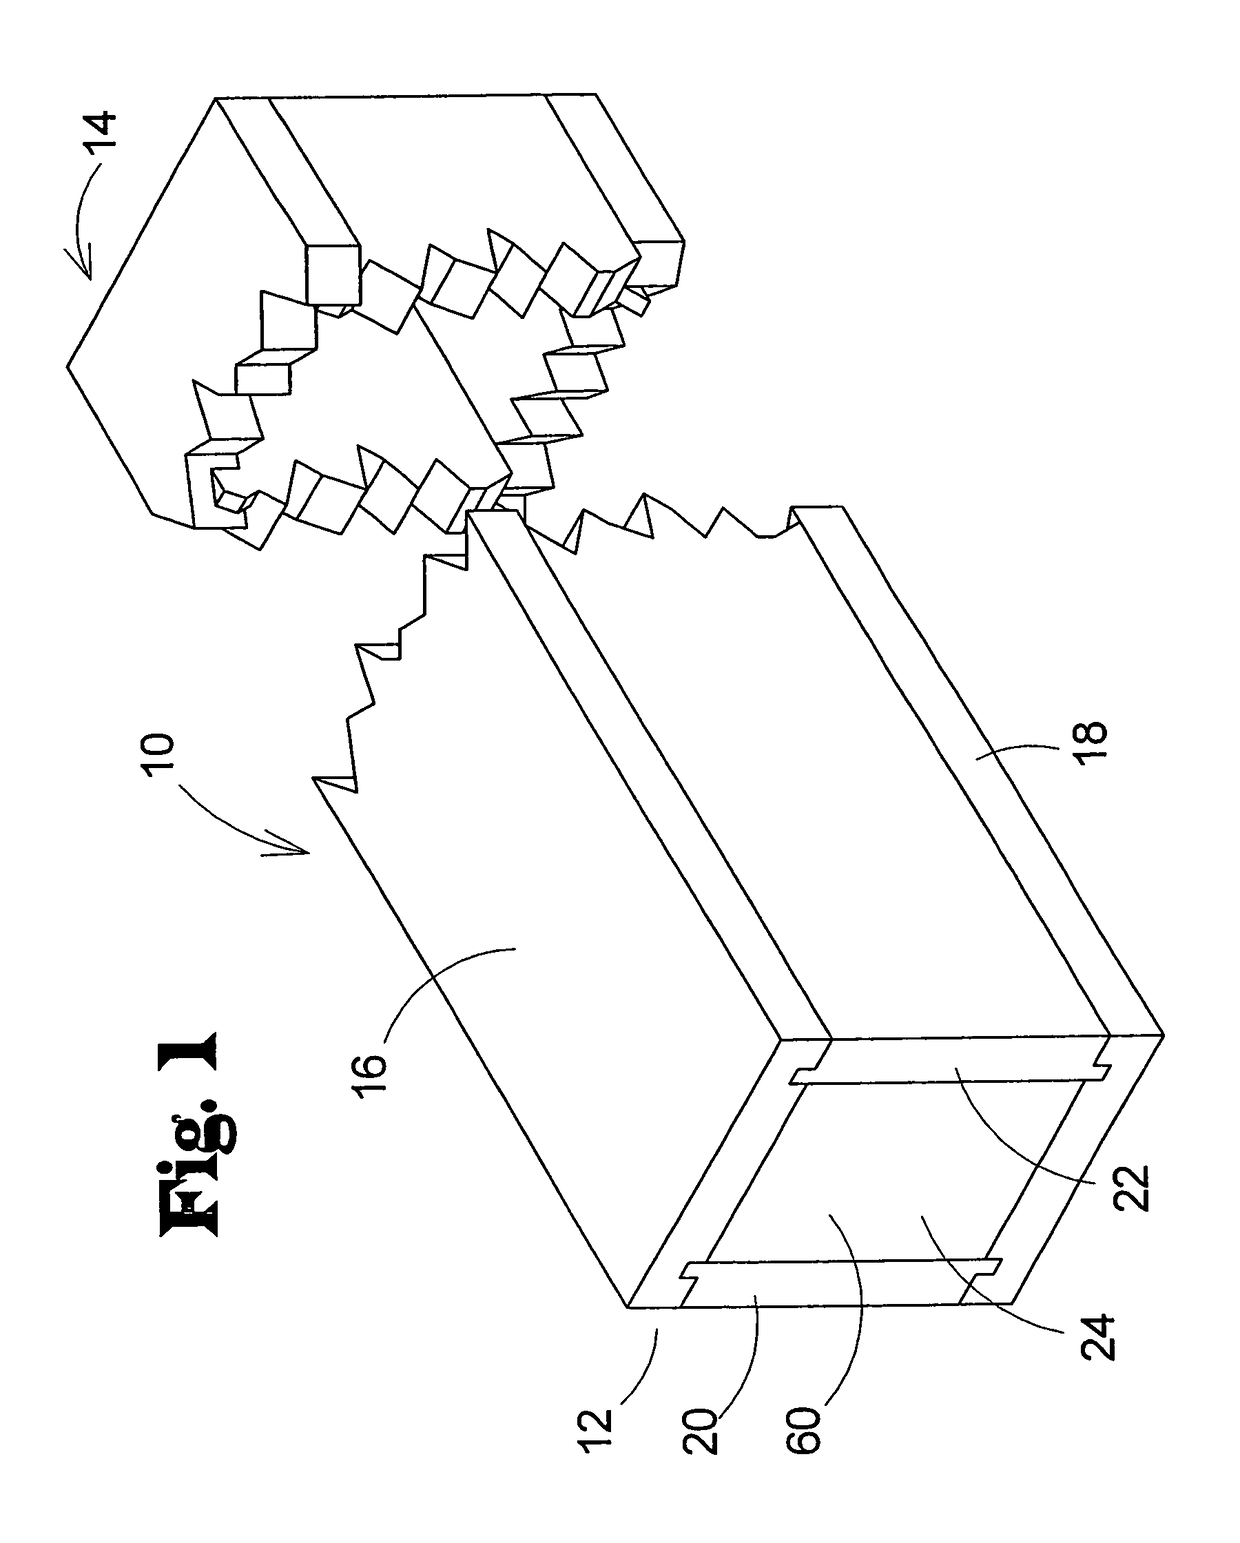 Prefabricated structural element